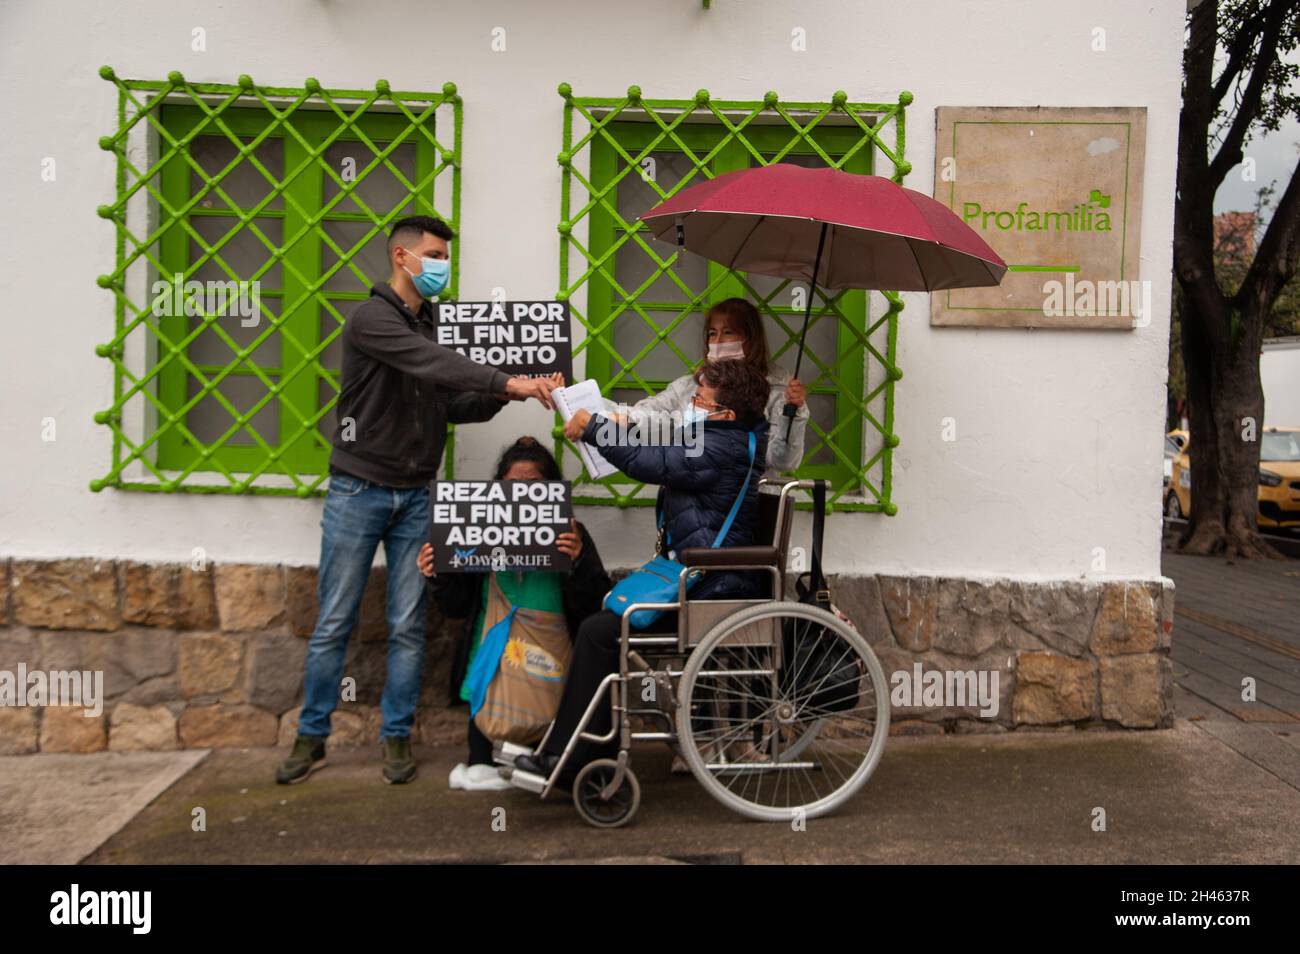 A group of people protests outside Profamilia, family planification health center in Bogota against the practice of abortions in Colombia with a sign that reads 'Pray for abortions to end' on October 30, 2021. Stock Photo